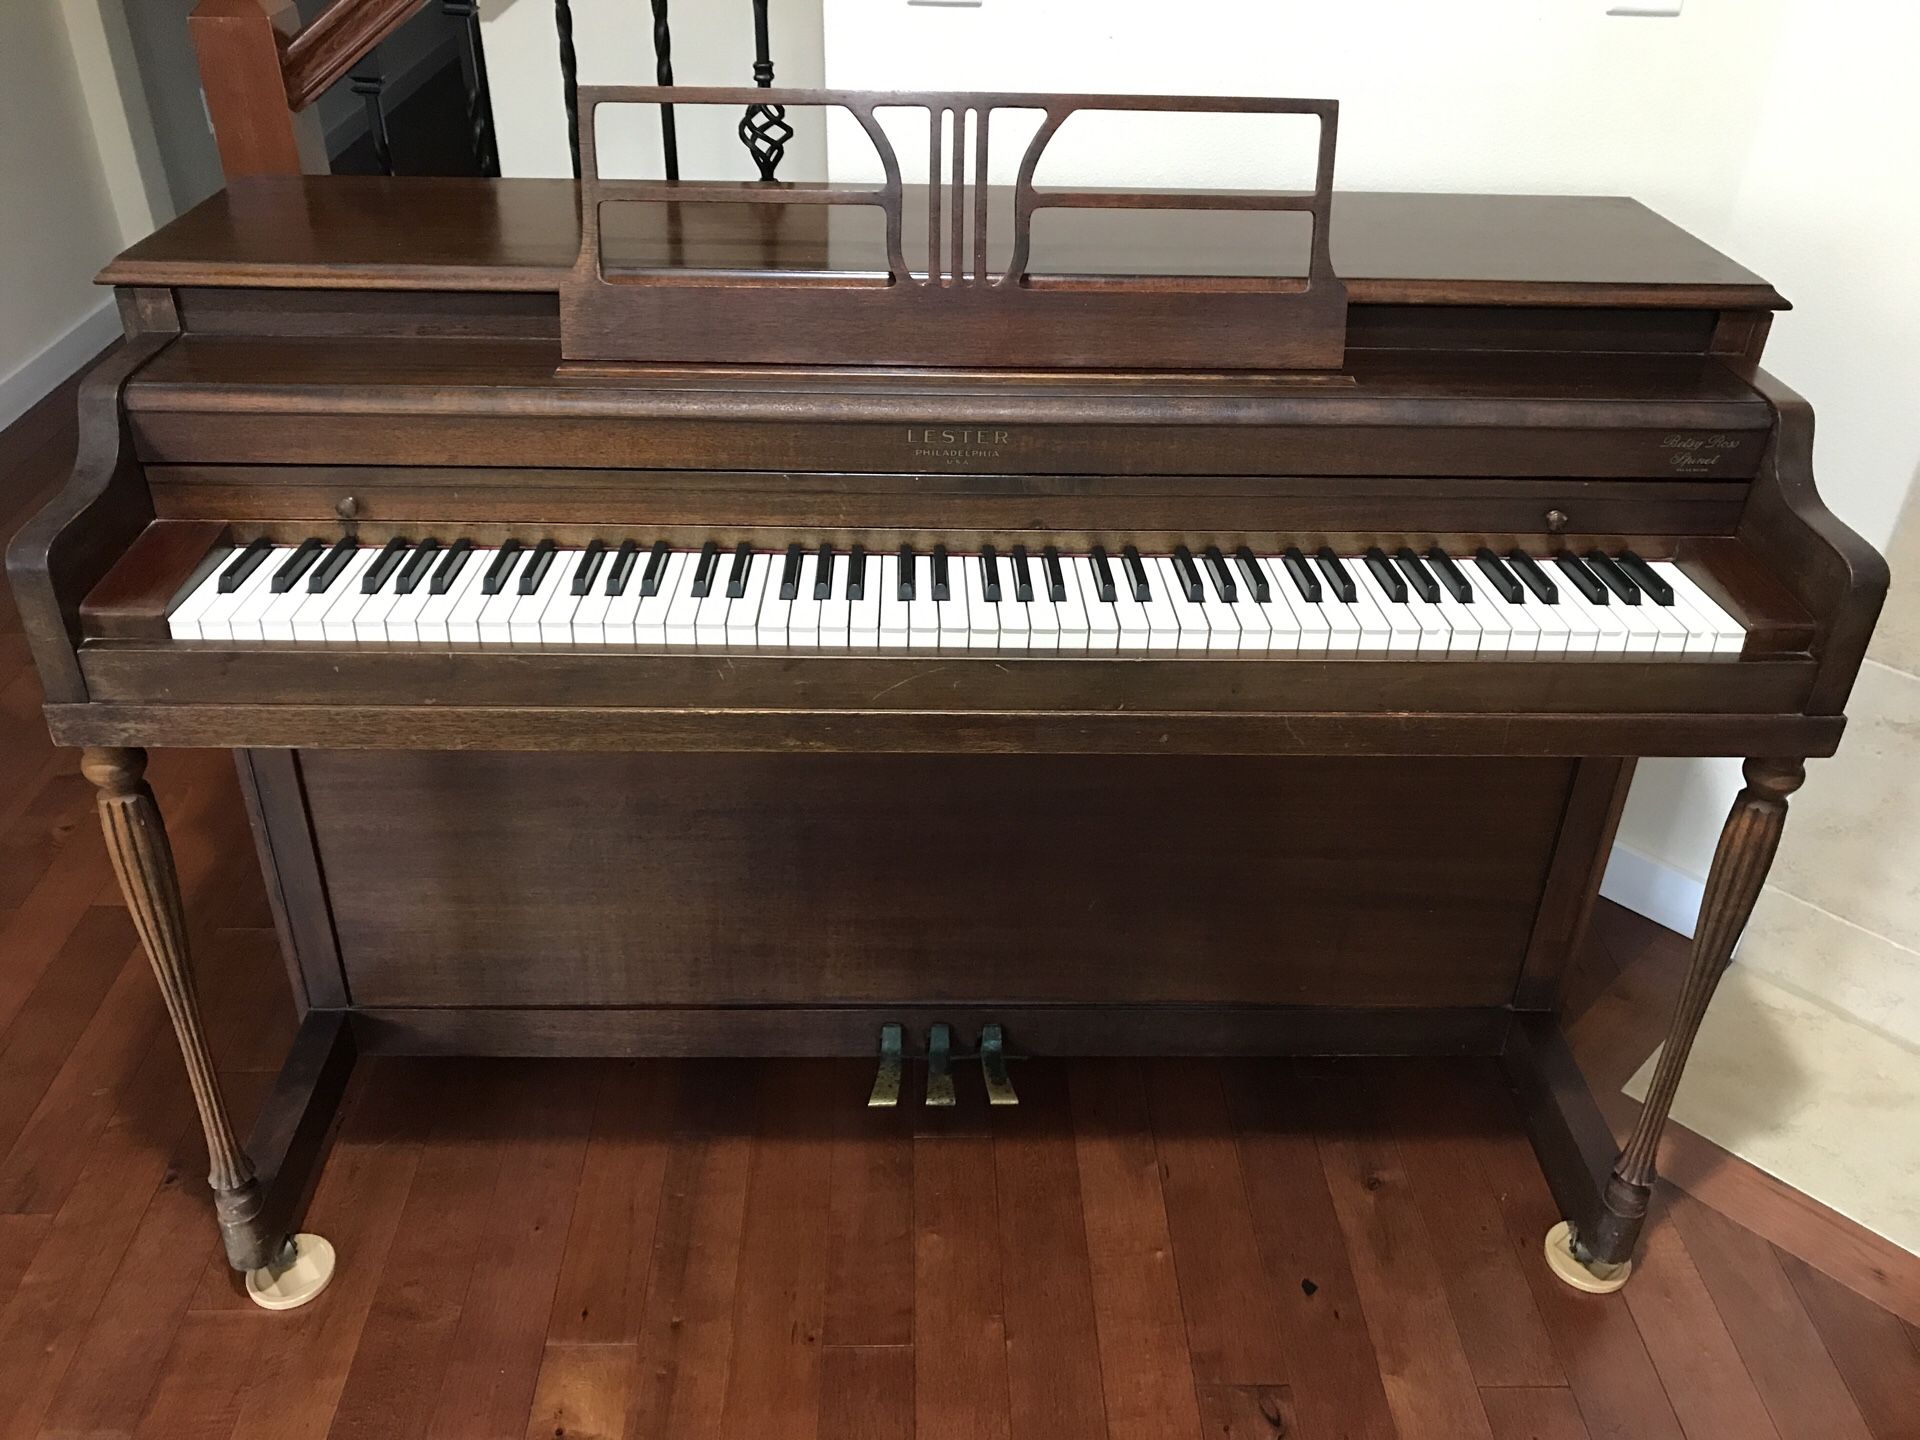 Piano for FREE